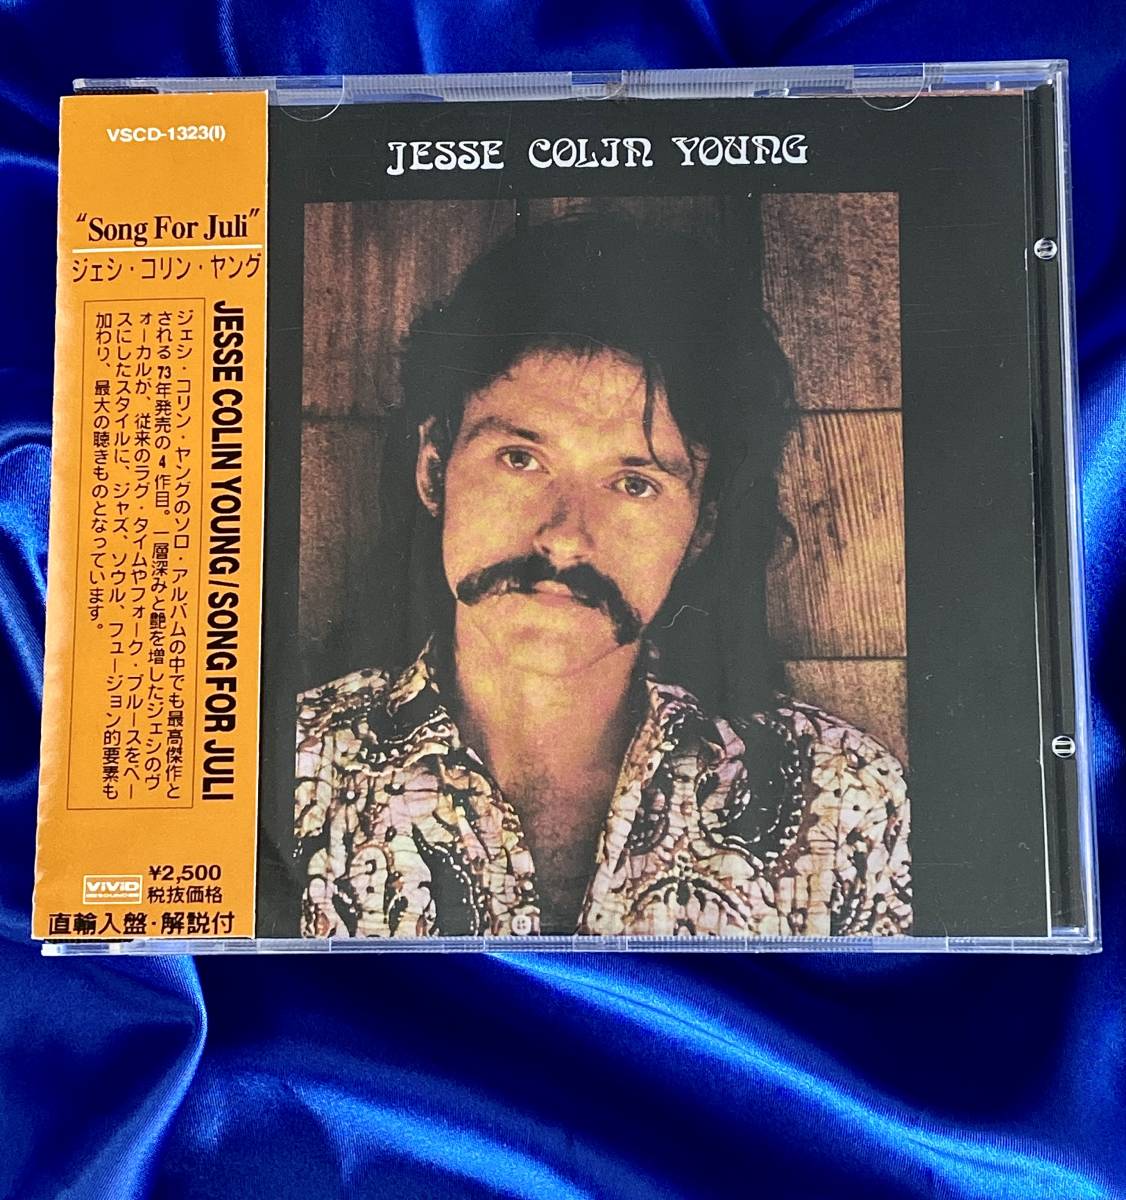 ★Jesse Colin Young / Song For Juli　ジェシ・コリン・ヤング/ソングフォージュリー●1995年国内盤VSCD1323(I)_画像1